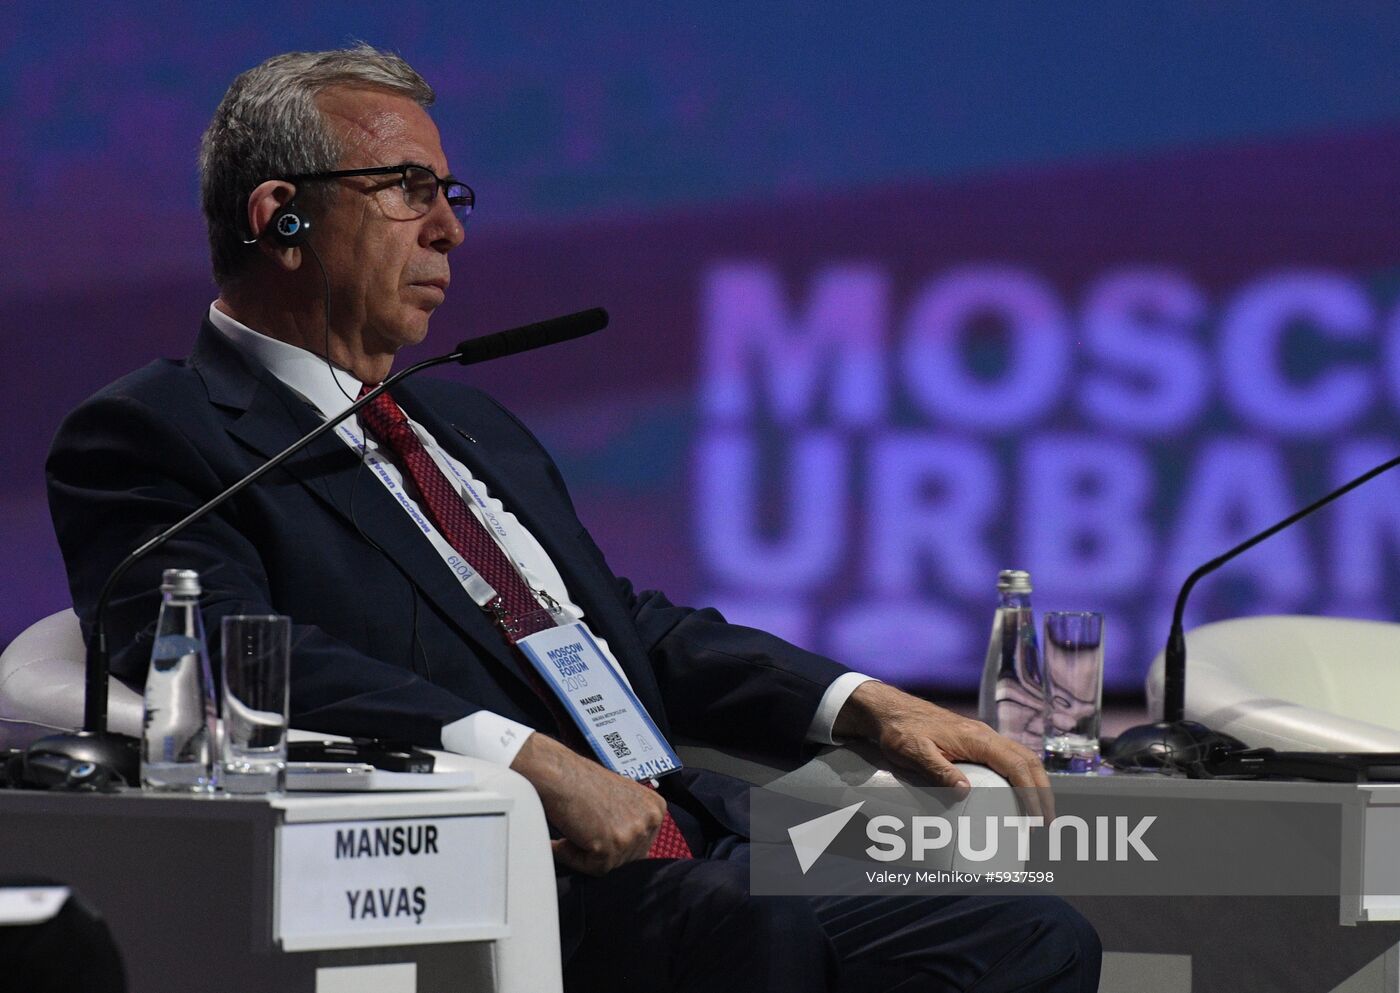 Russia Moscow Urban Forum